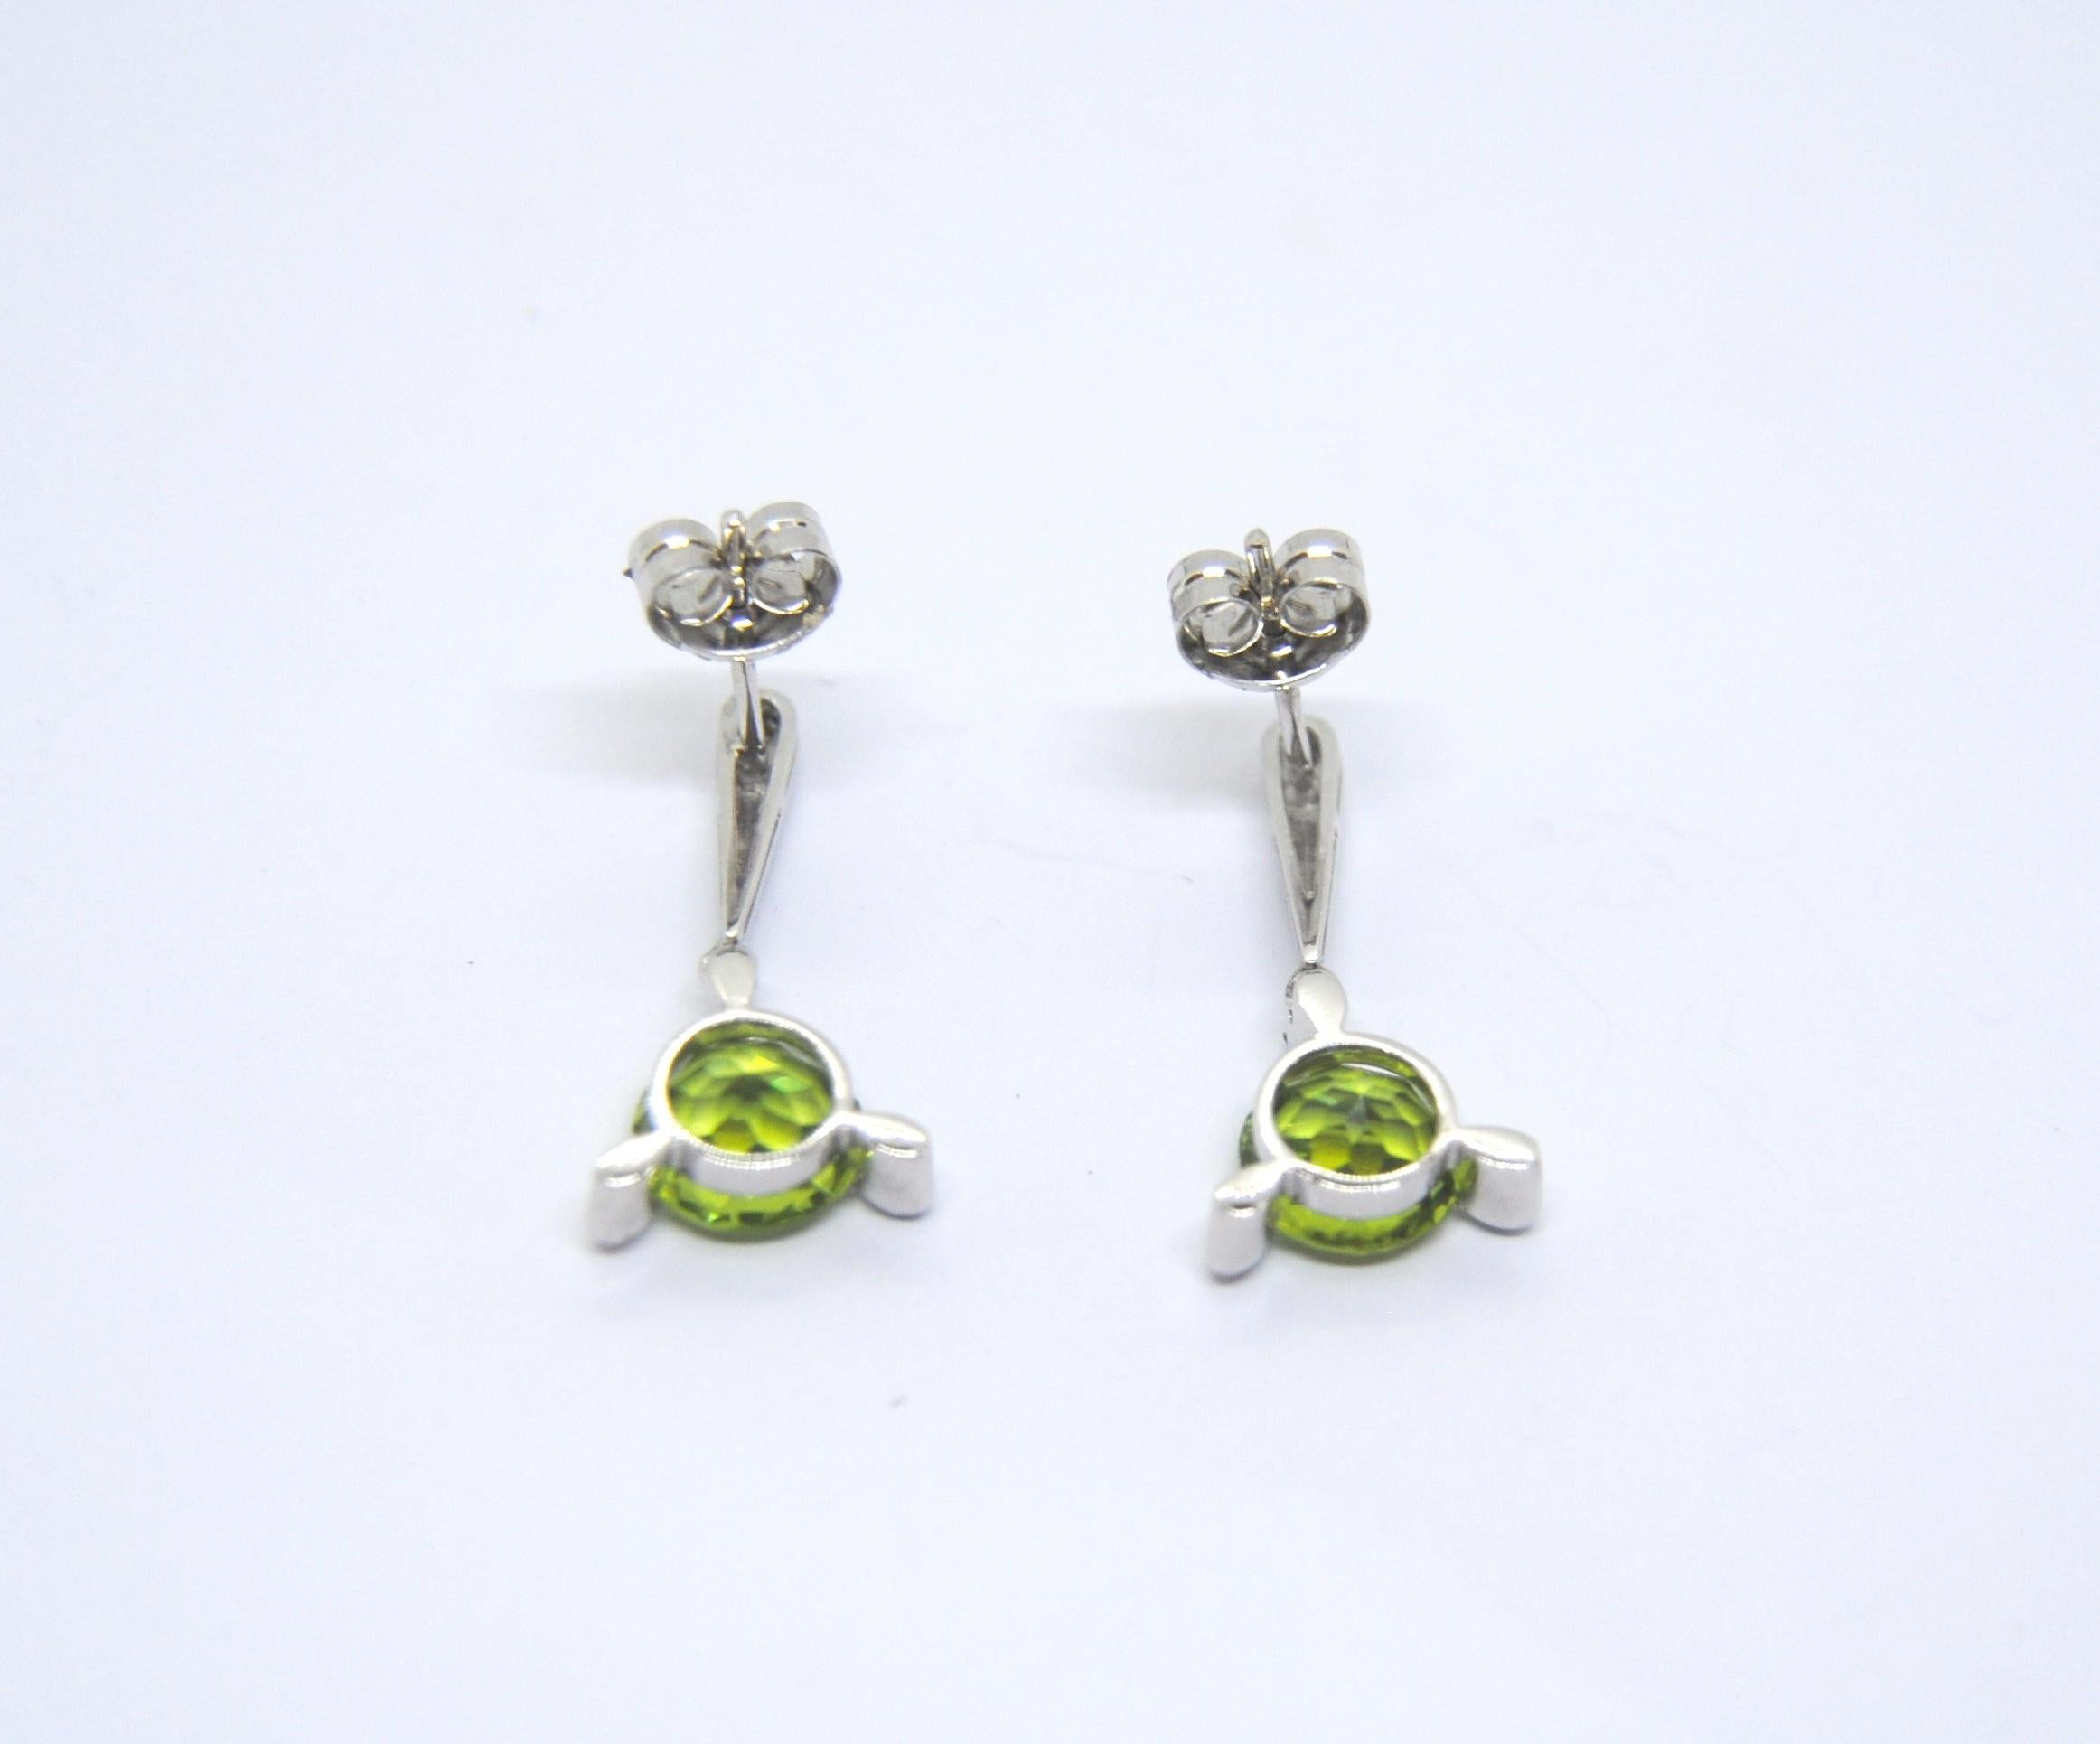 This pair of earrings weight 4.4grams and measures 22mm or 0.75 inches
Peridots are 2,00ct each 
The pavé of diamonds are 10 from 0.01 to 0.03ct 
Please note that carat weights may slightly vary as each Irama Pradera Jewels creation is handmade.